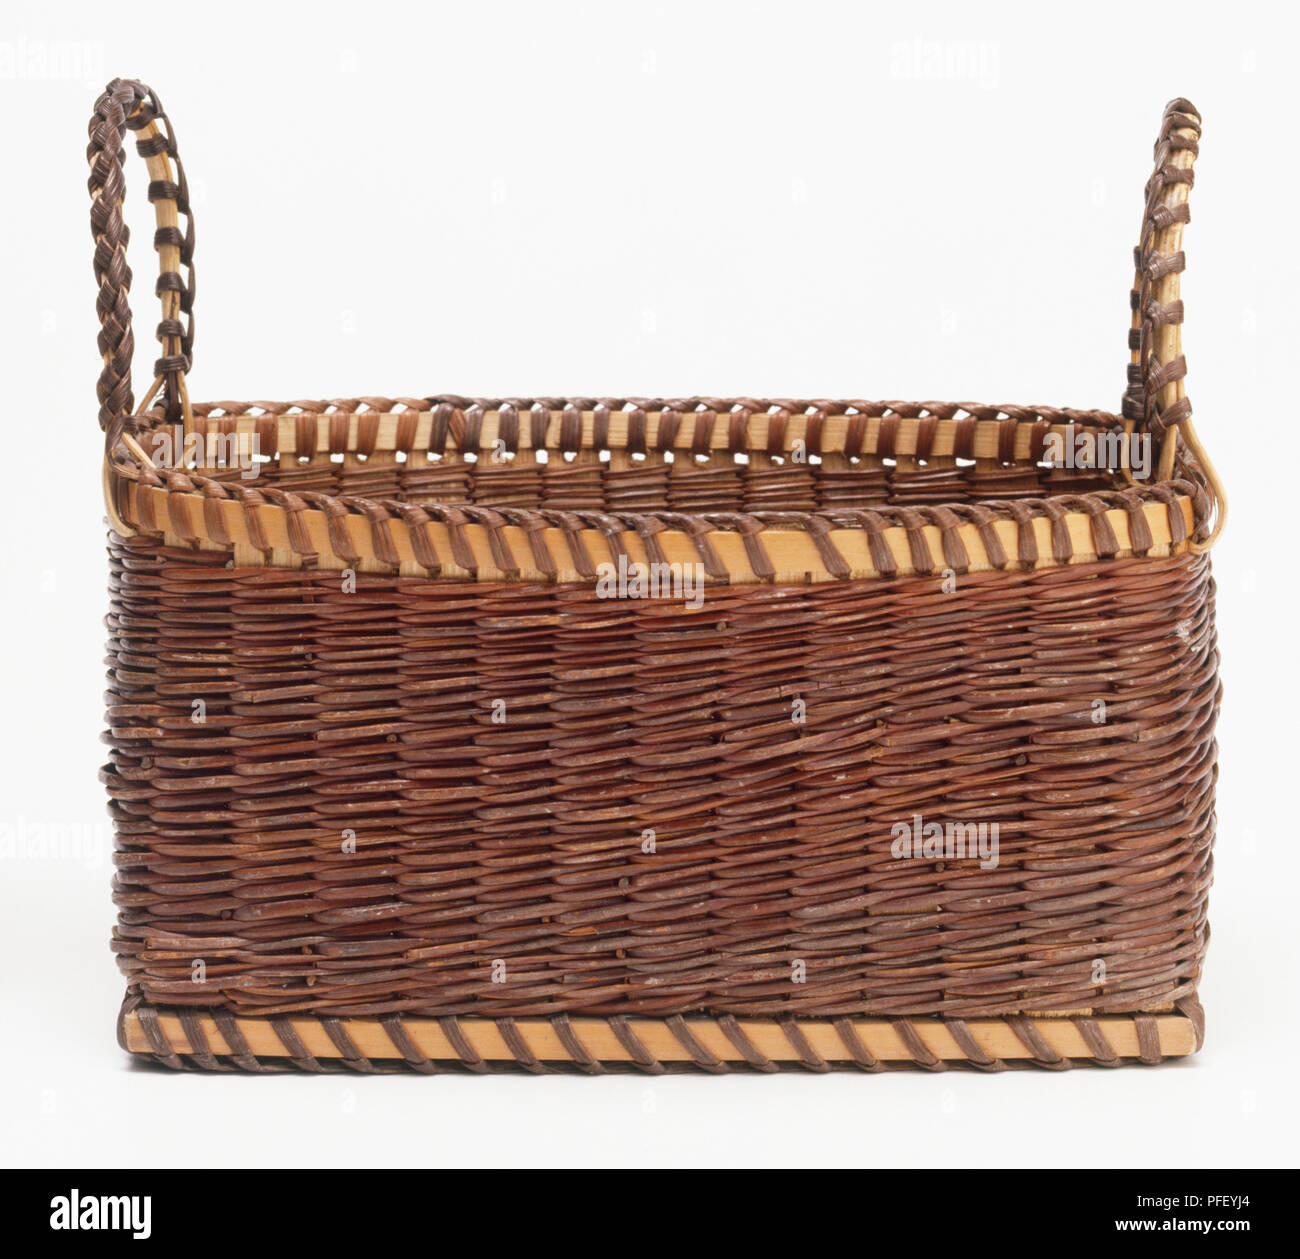 Rectangular brown wicker basket with two handles Stock Photo